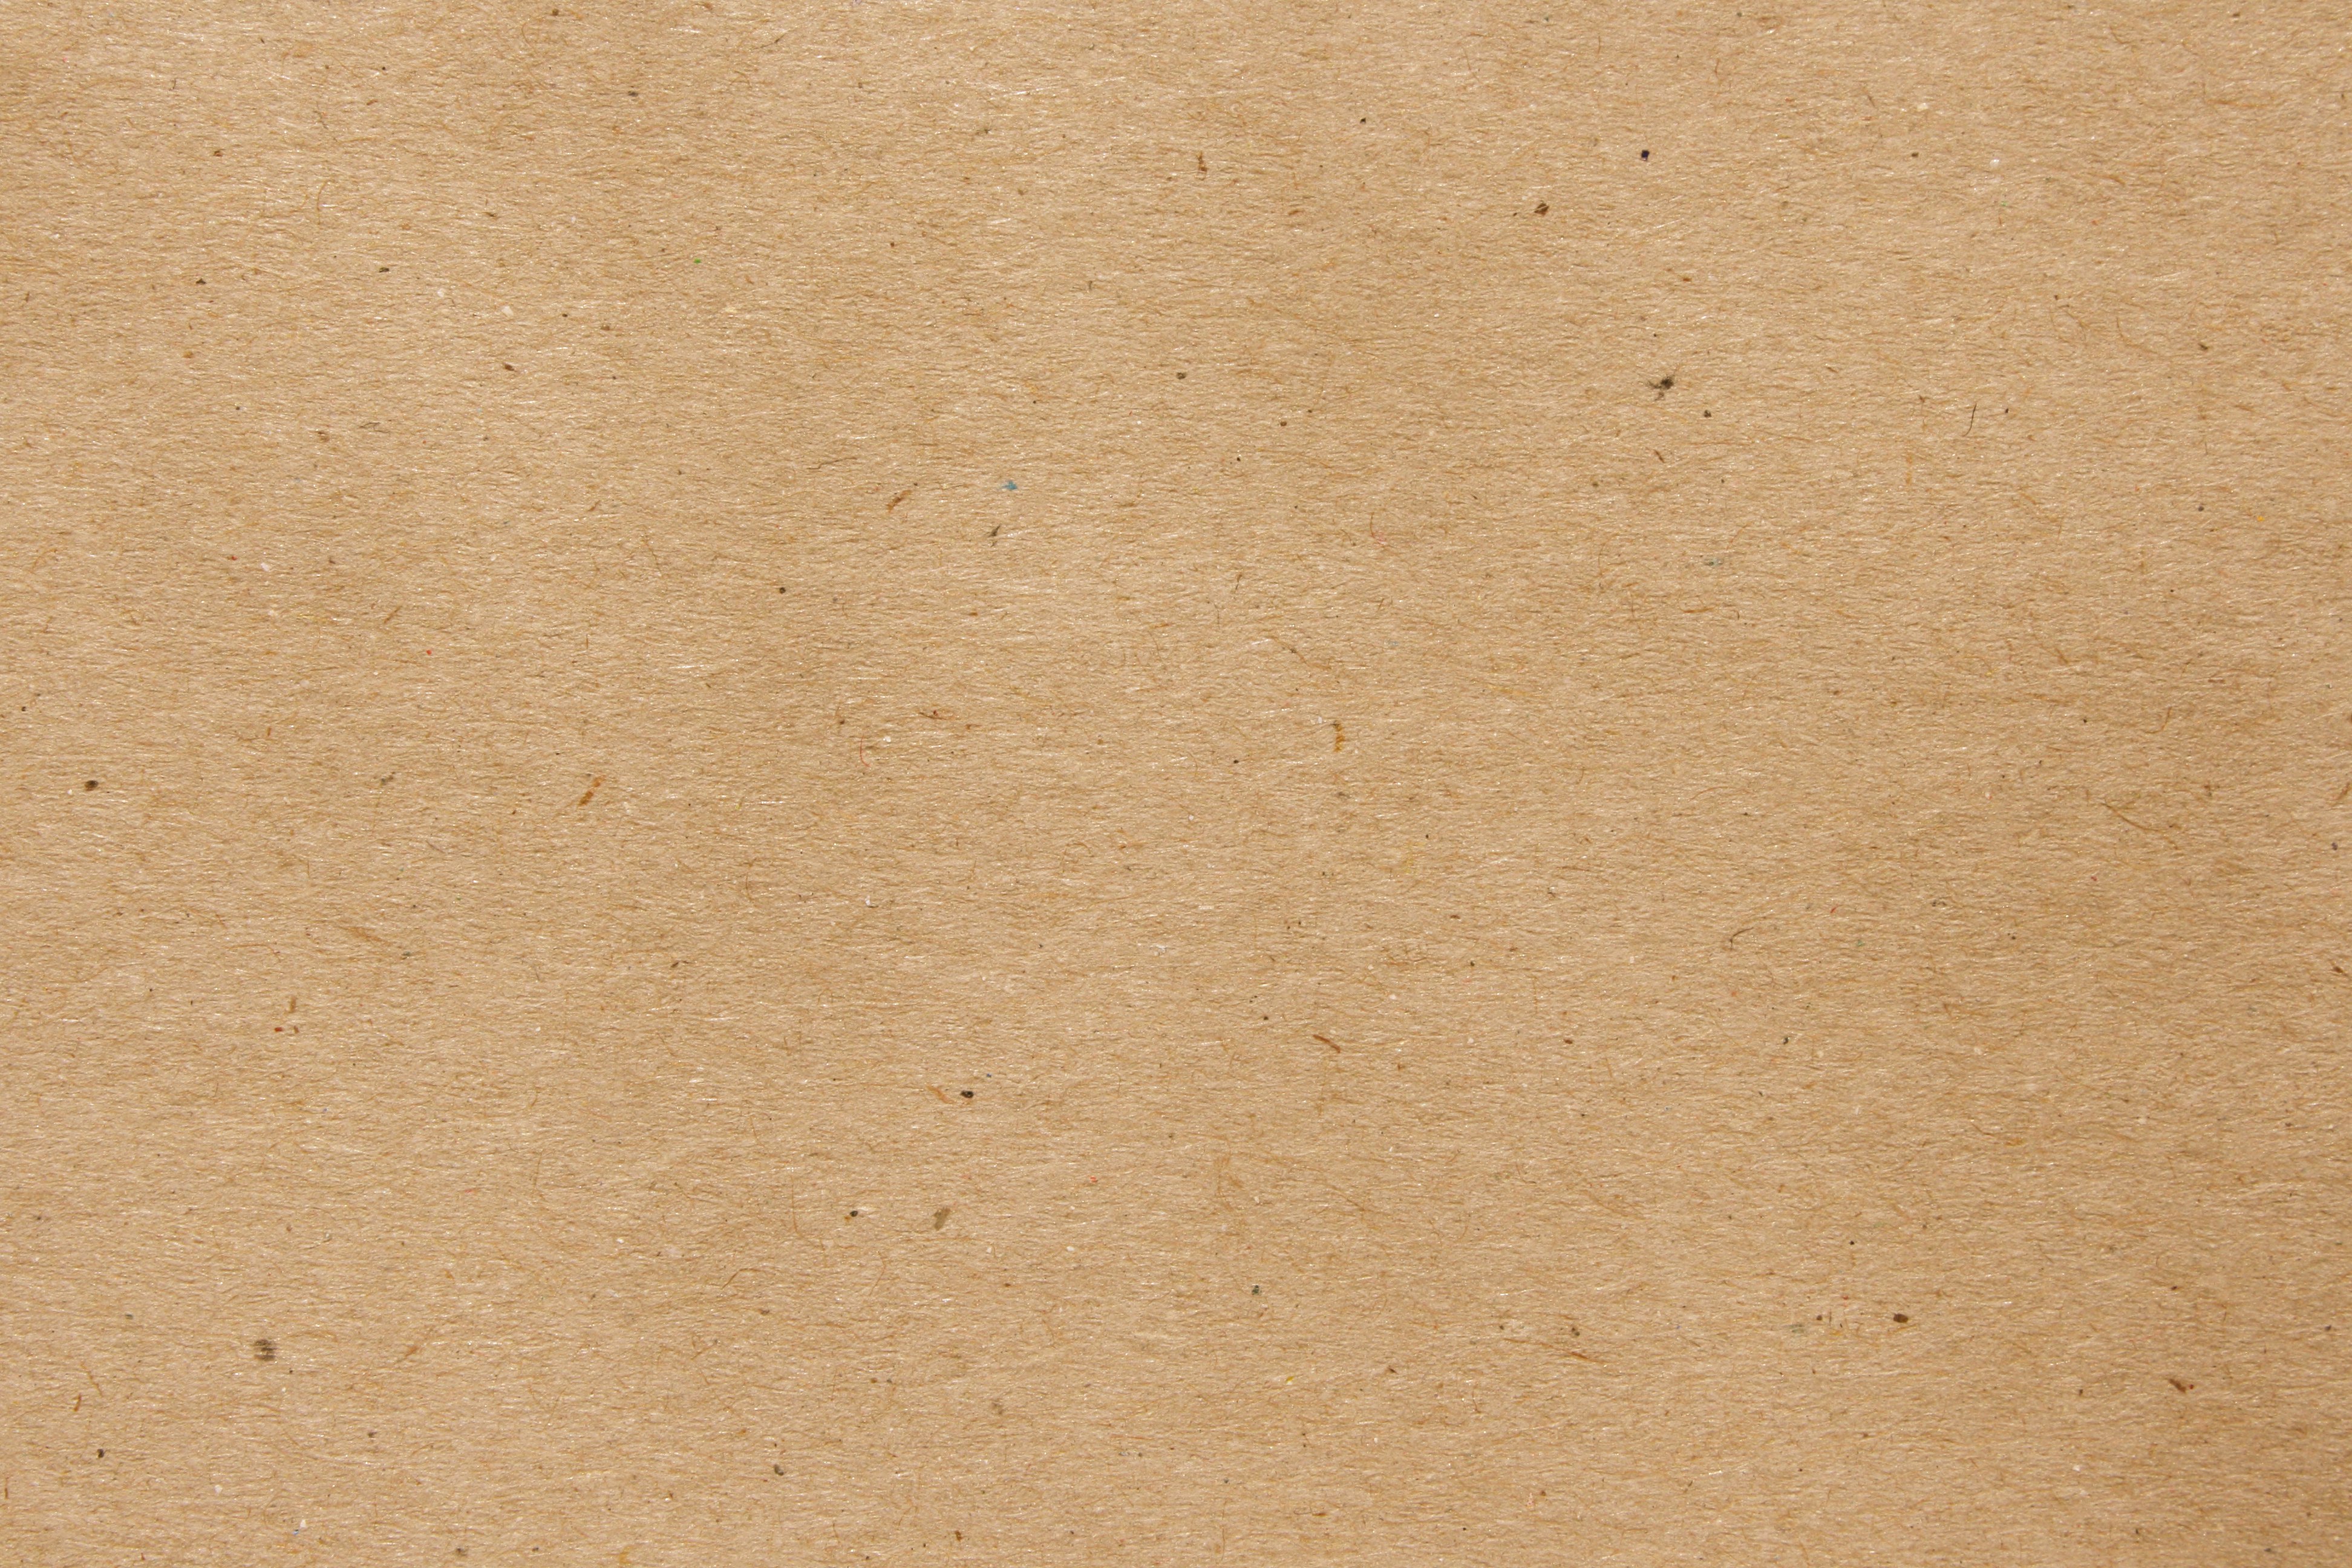 Light Brown or Tan Paper Texture with Flecks Picture | Free ...